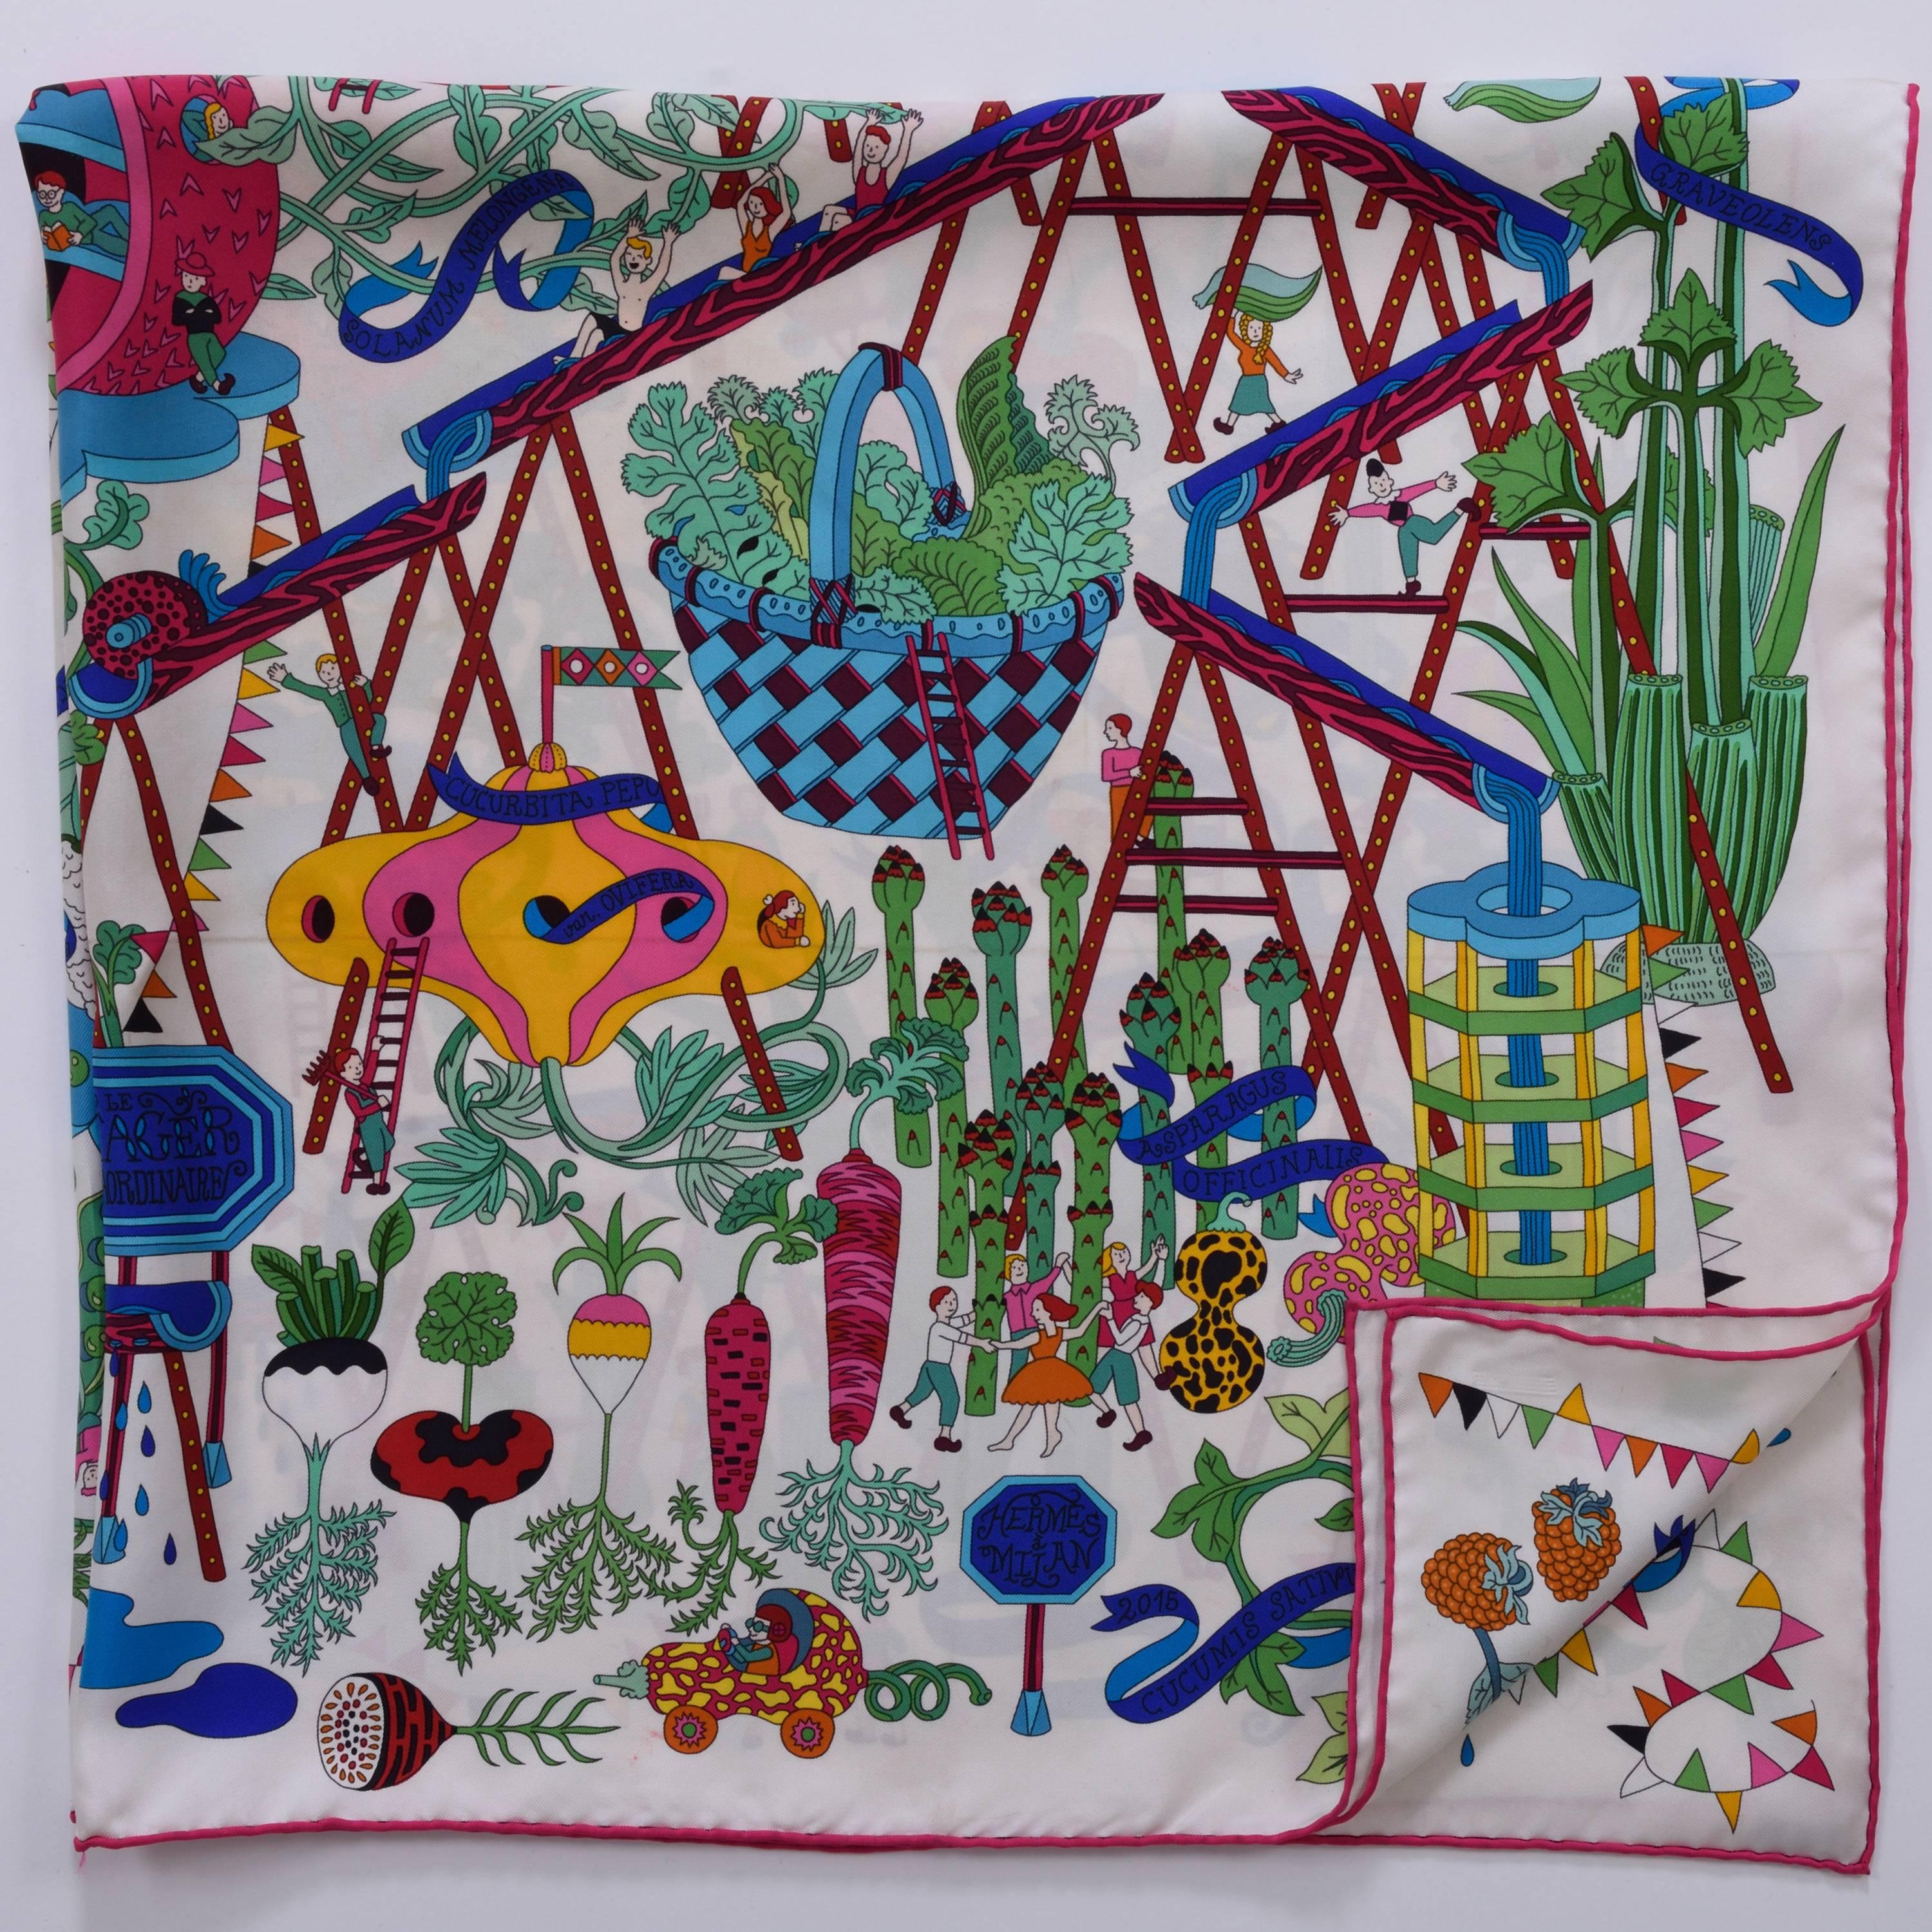 This authentic Hermès Scarf is 100% silk and has white background with colorful vegetable garden motif, with hand-rolled edging. 

Good condition 

Design by Pierre Marie  -Made in France-

MEASUREMENTS:
35 x 35 inches